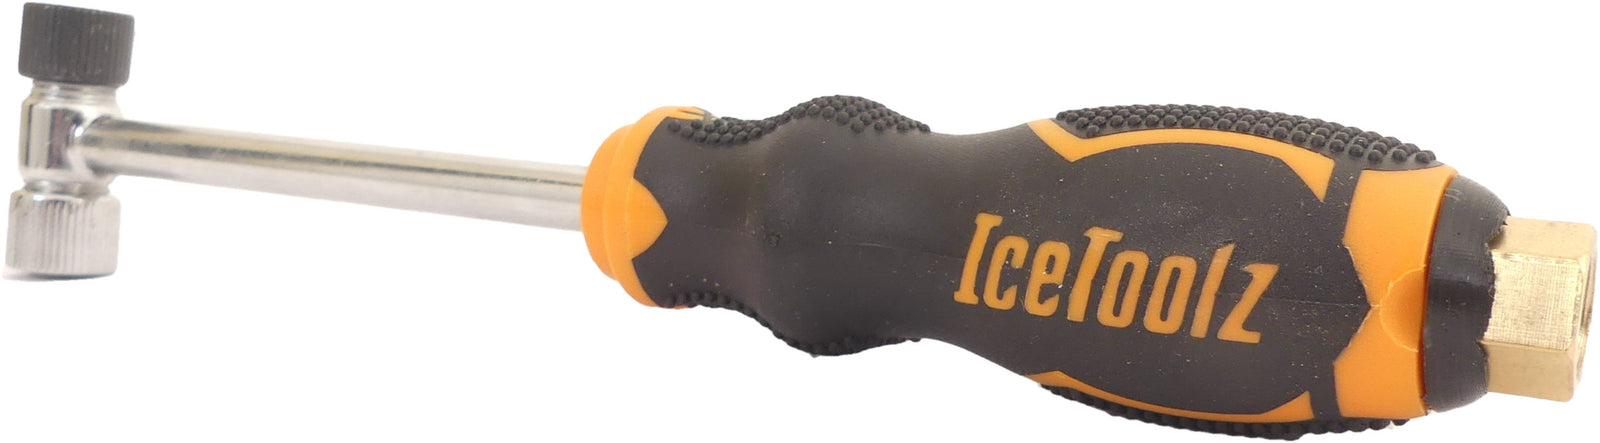 Icetoolz compressor handle with screw connection